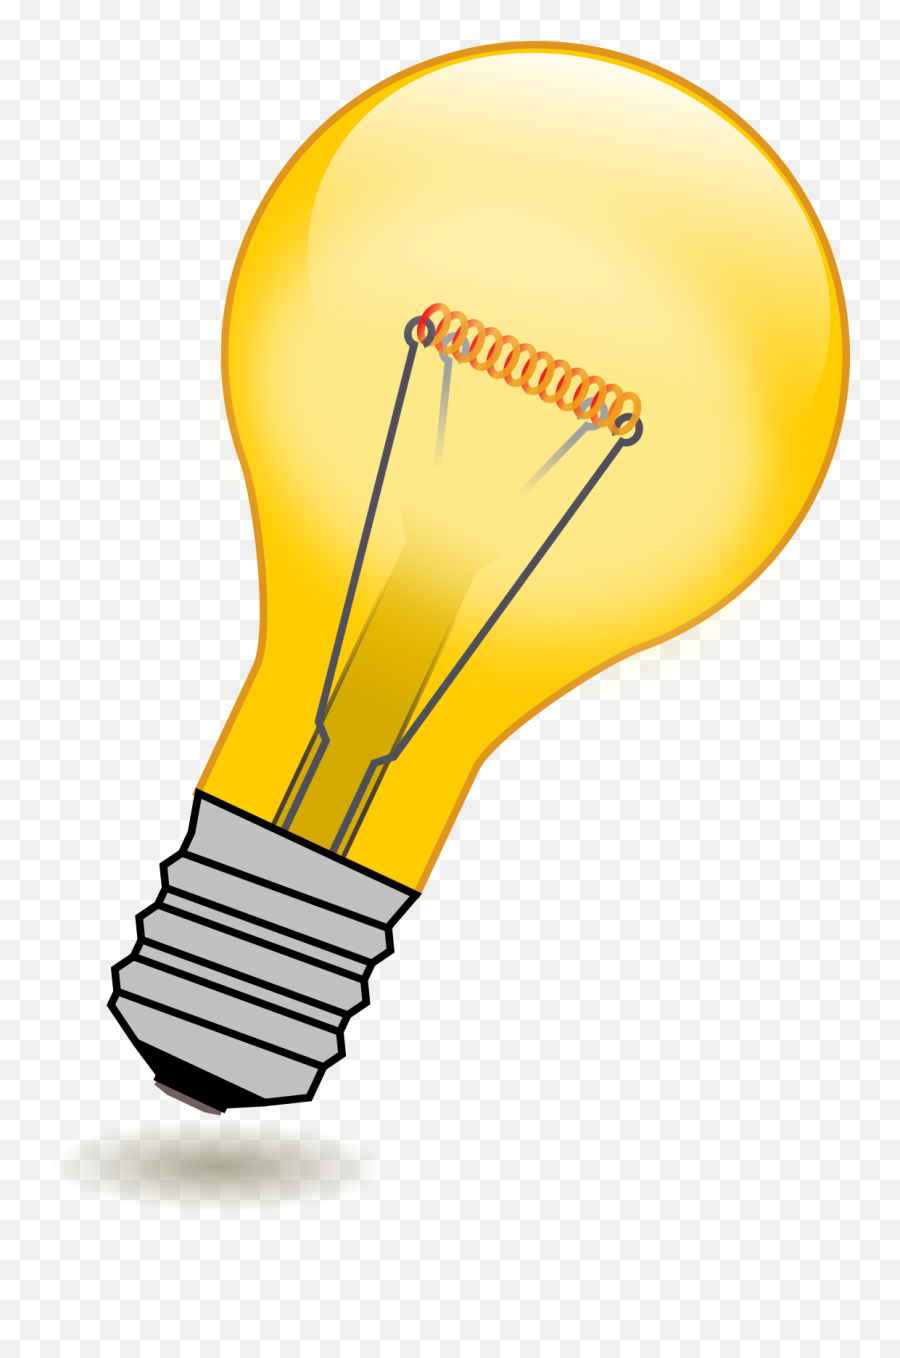 Filelight Bulb Icon Tipssvg - Wikimedia Commons Light Bulb Png,Lightbulb Icon Png